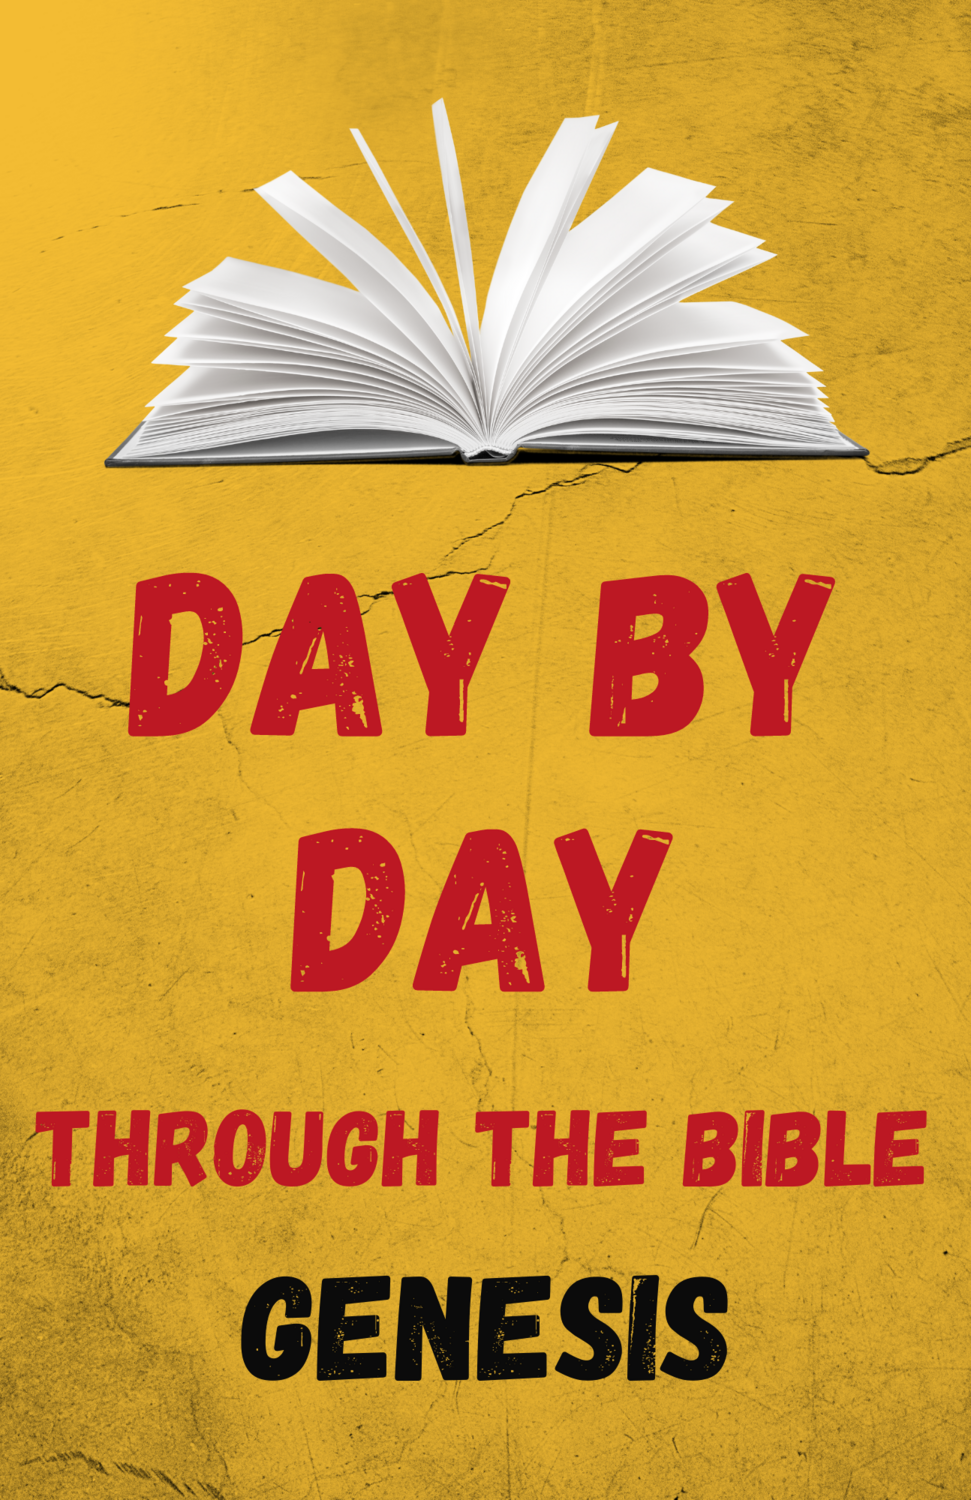 Day by Day Through the Bible: Fifty Days in Genesis - Digital Download